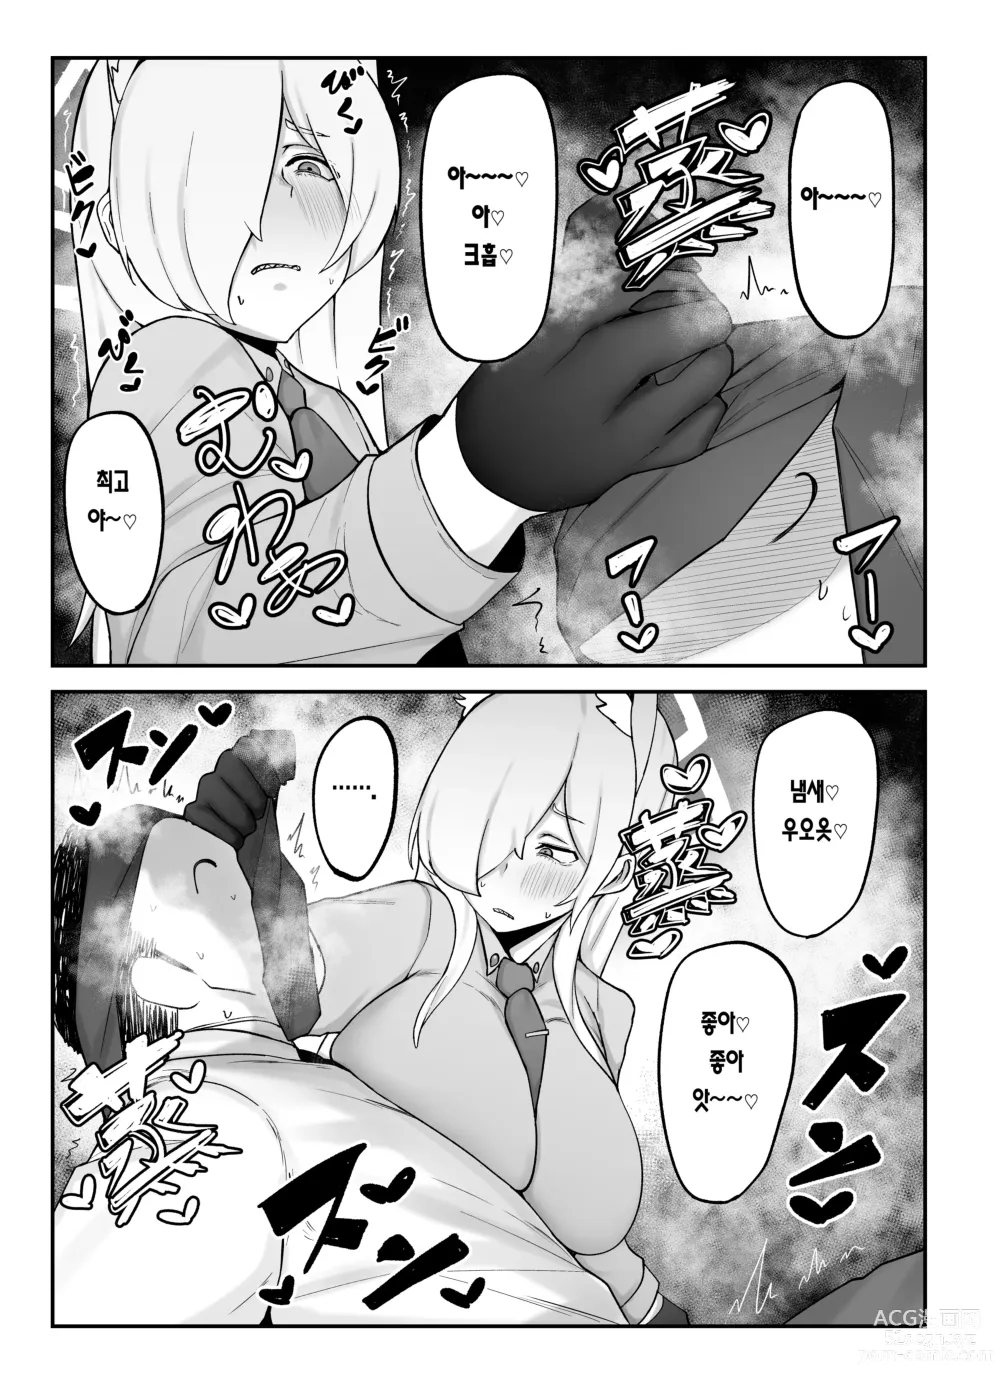 Page 5 of doujinshi 당번은 오가타 칸나